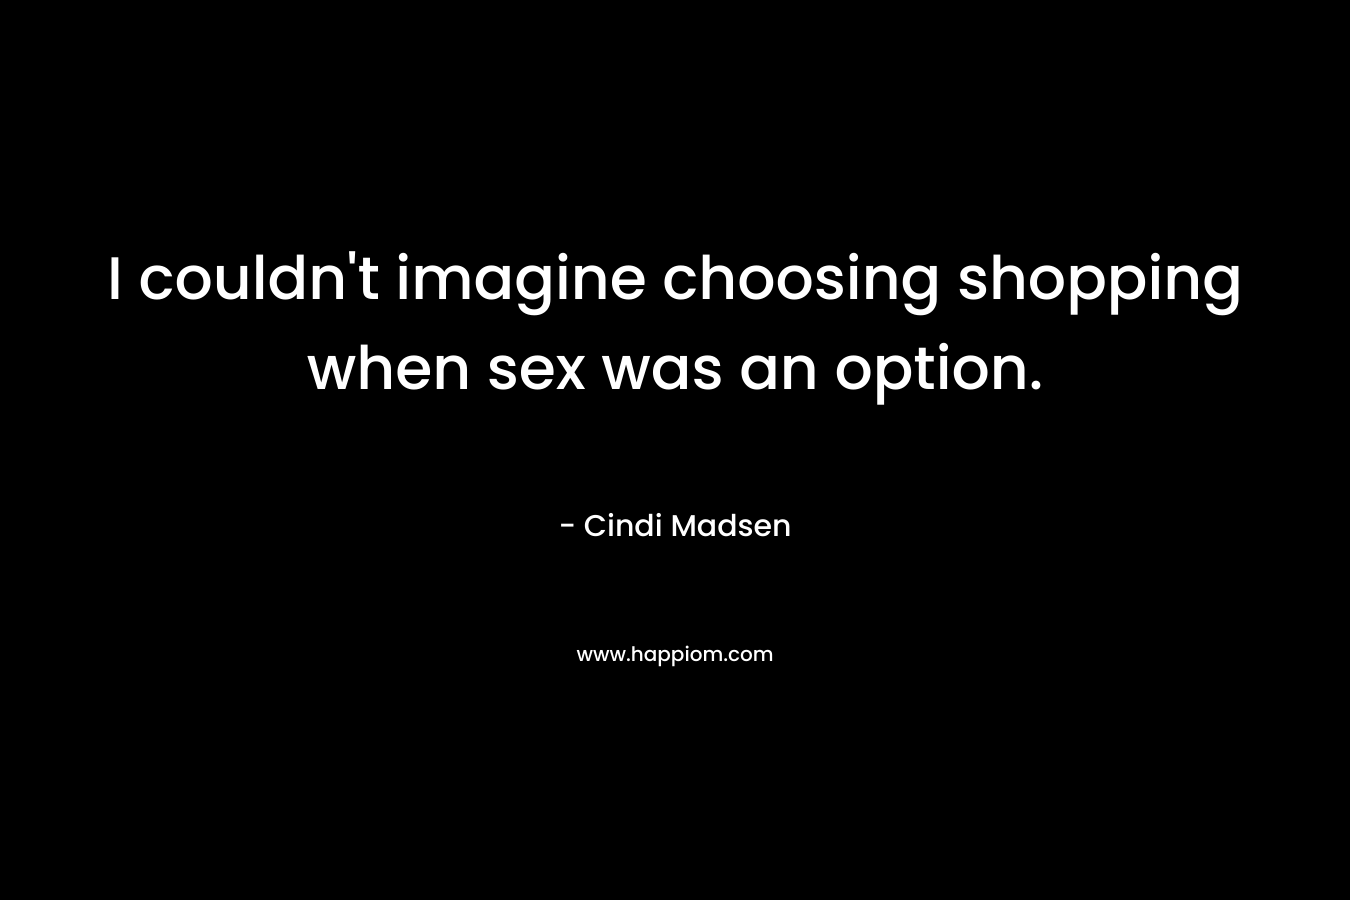 I couldn't imagine choosing shopping when sex was an option.